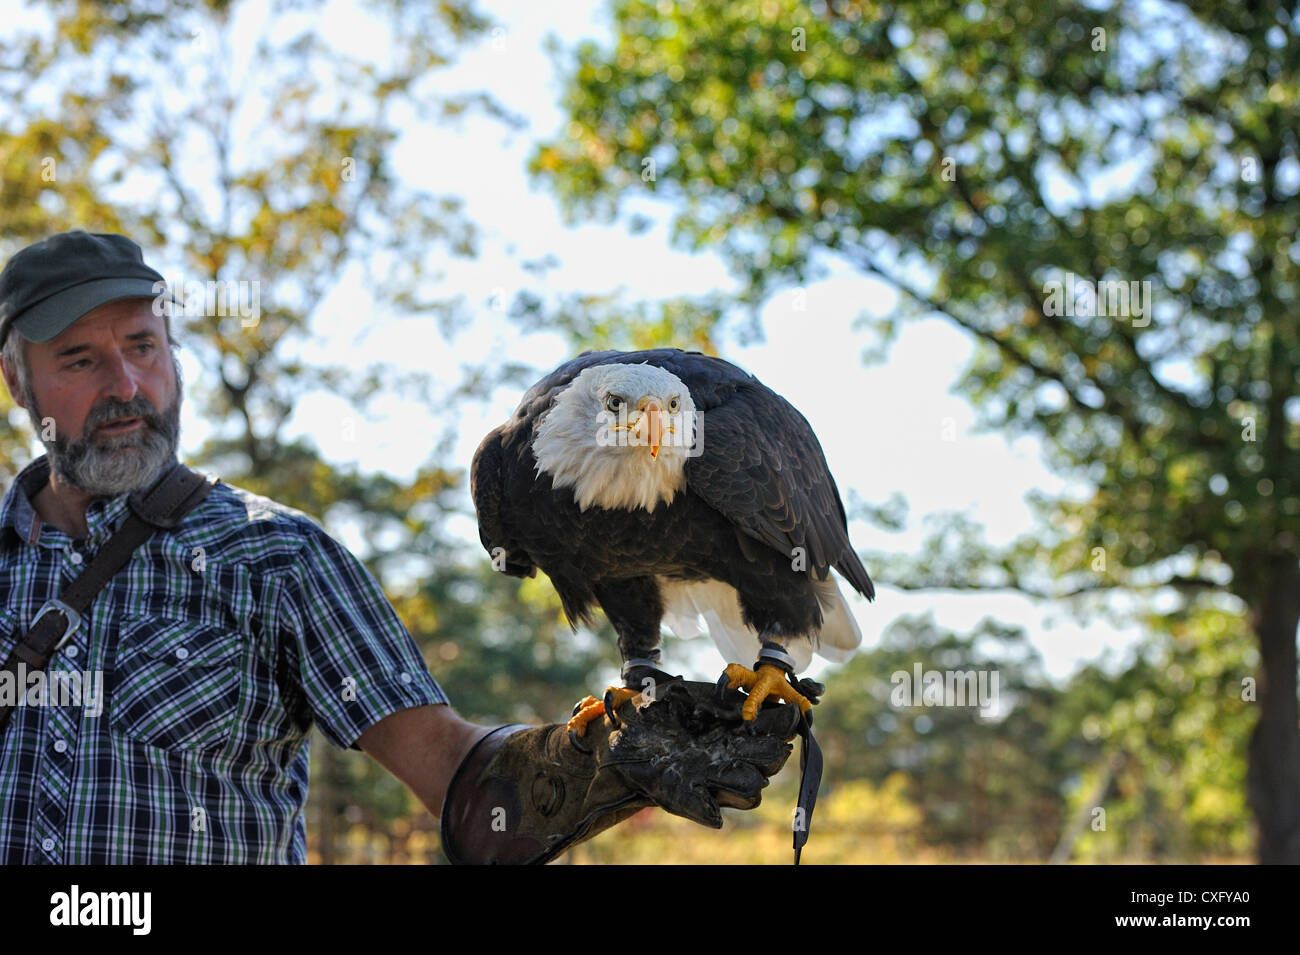 Falconer carrying a bald eagle on his arm. Stock Photo